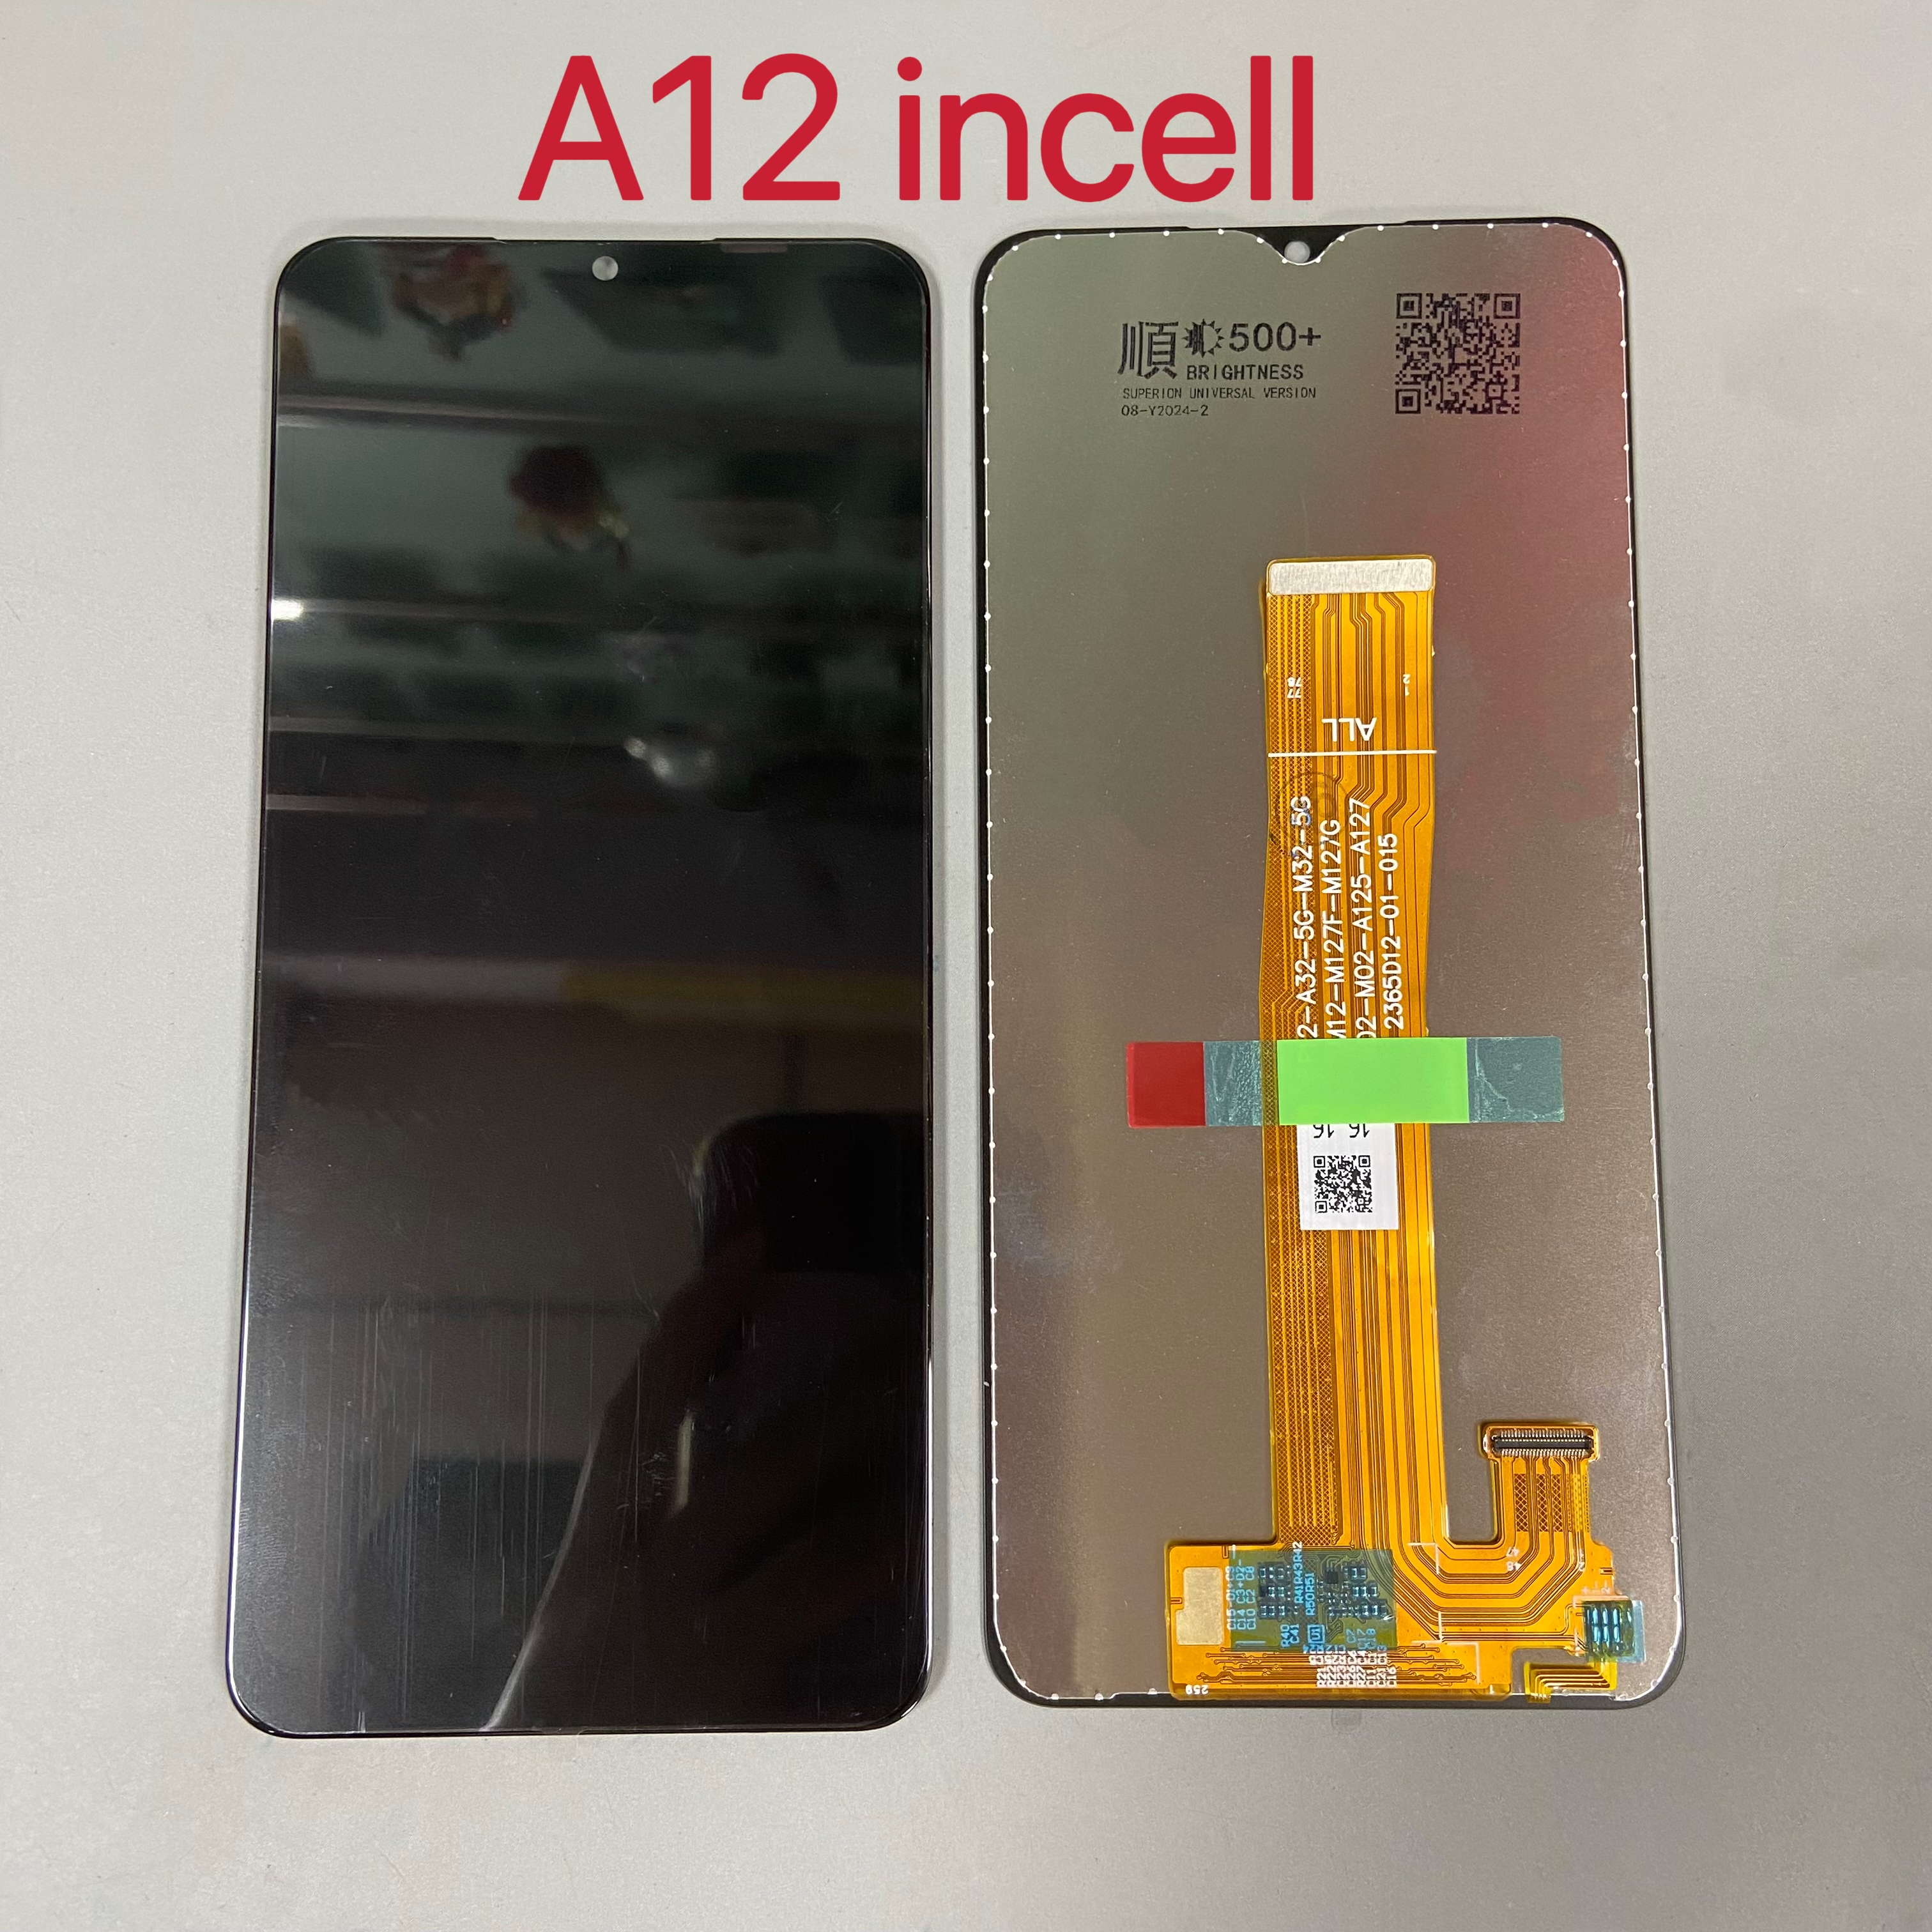 For Samsung A12 INCELL Lcd Screen display and Lcd Screen replacement